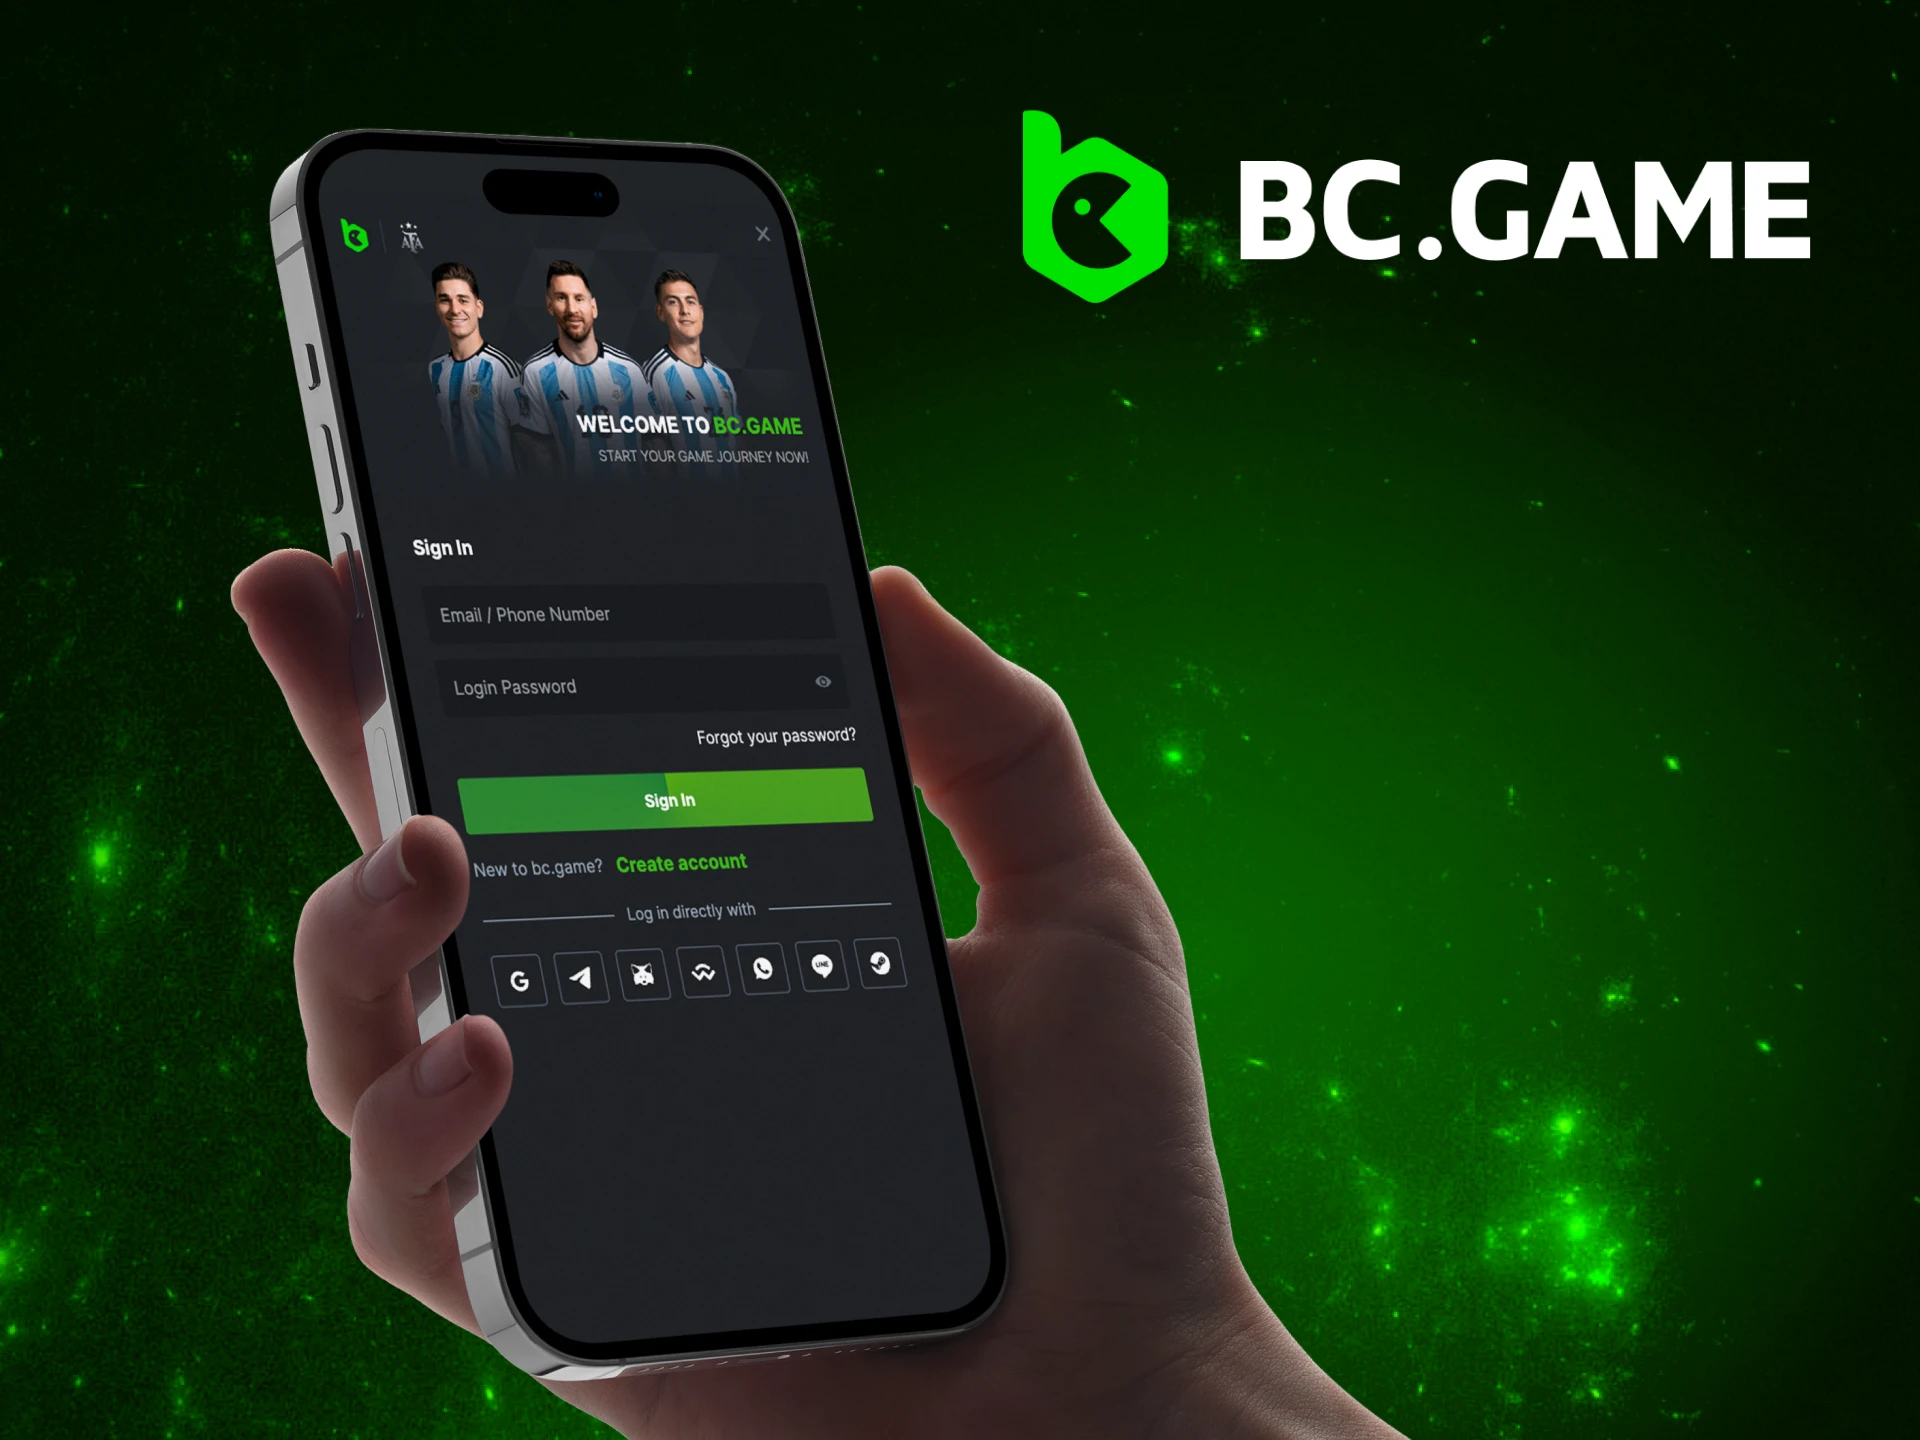 Go to the BC Game app and enter your account.